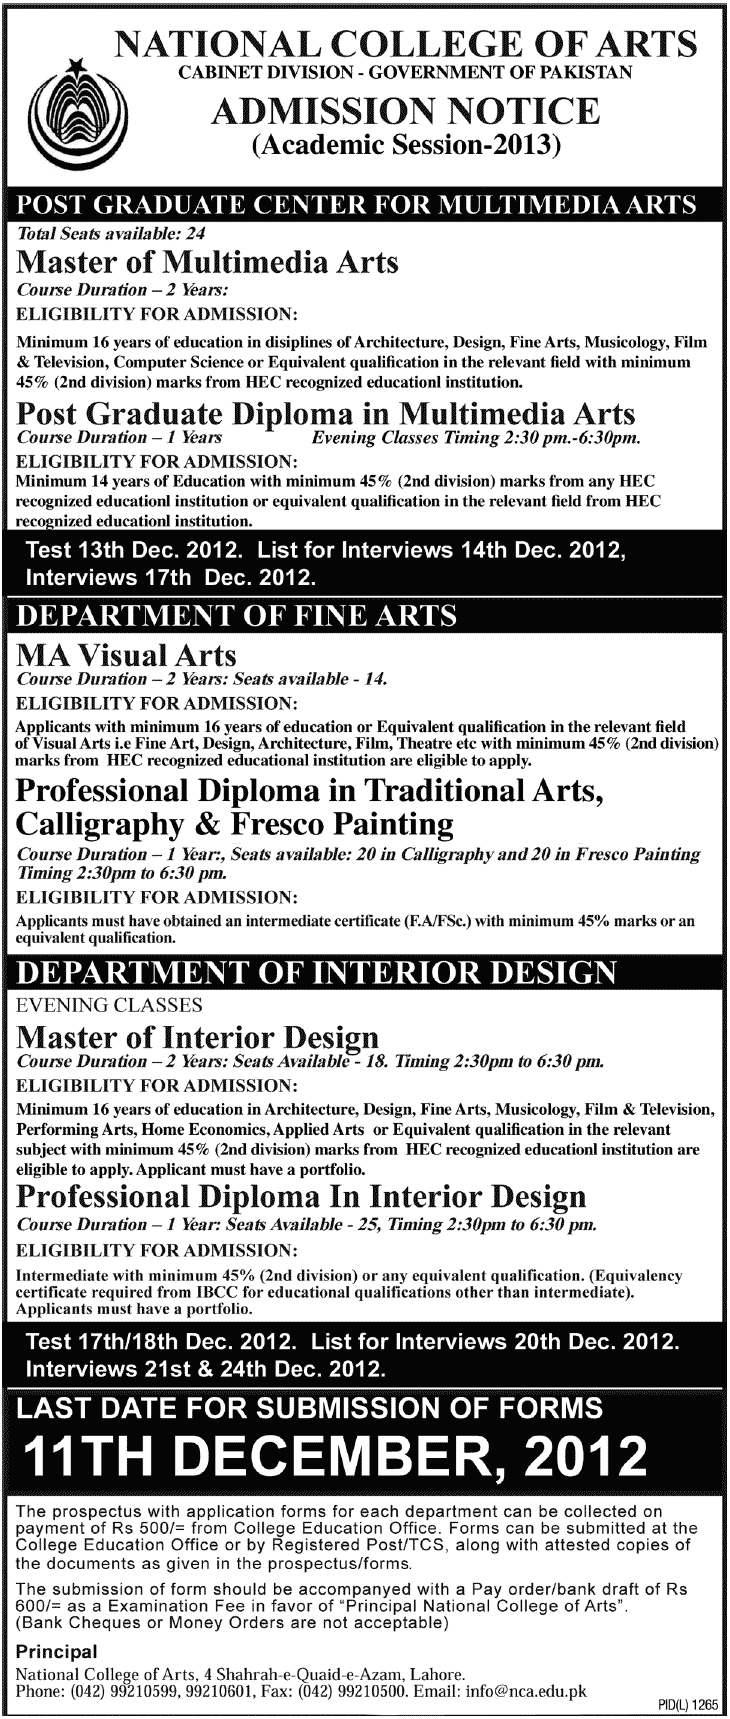 National College of Arts Admissions 2013